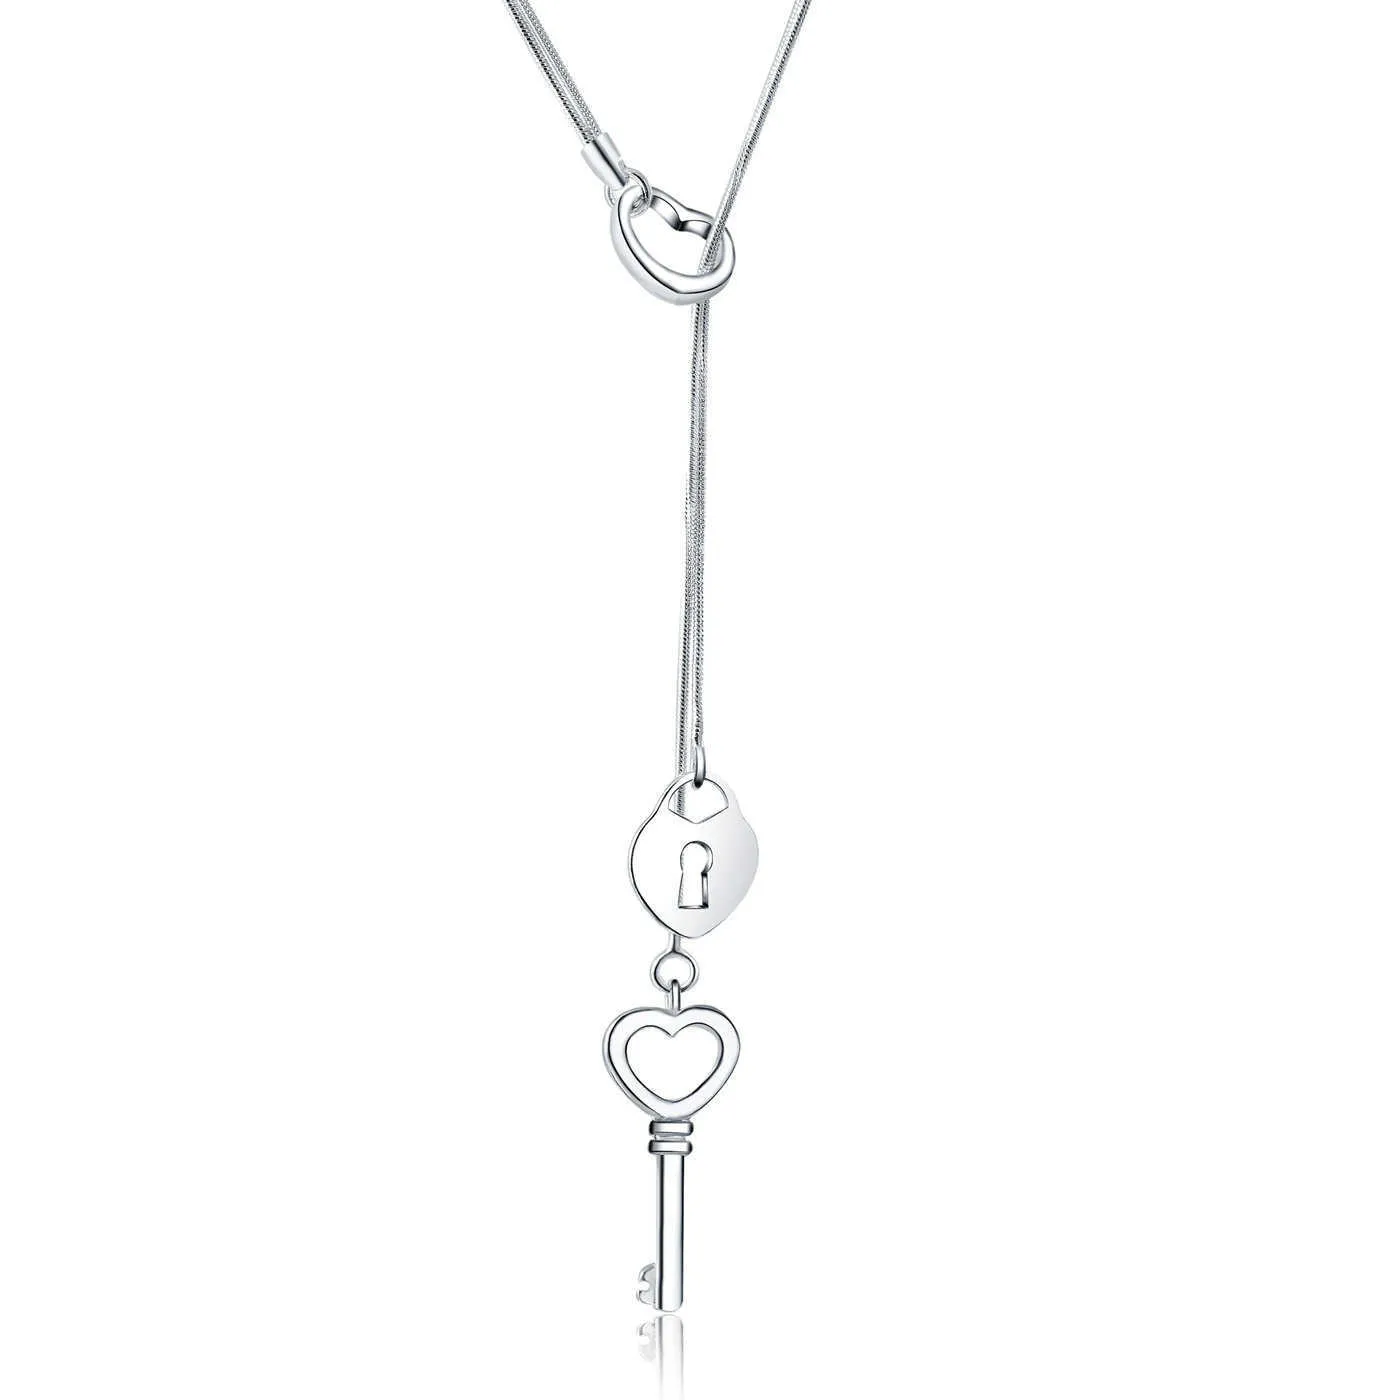 Silver 925 Special Offer Heart Lock Key Necklace For Women Wedding Party Jewelry Christmas Gifts